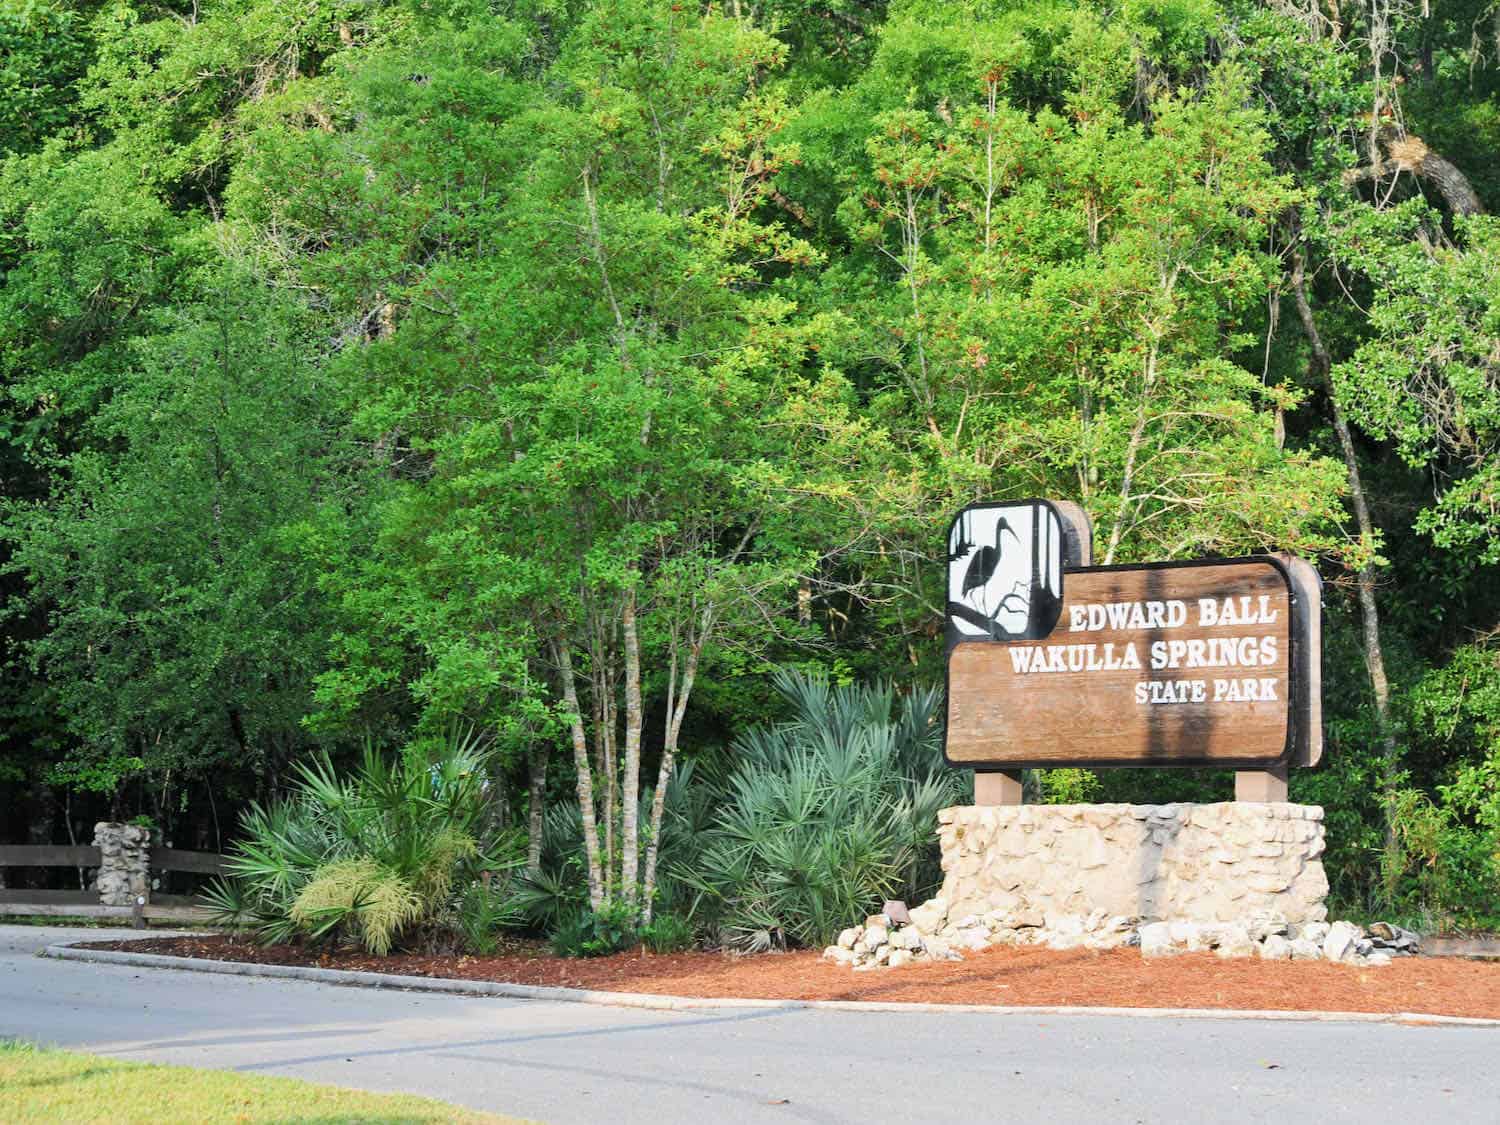 Driving the Big Bend Scenic Byway, make the turn onto the entrance road to Edward Ball Wakulla Springs State Park. A forest of trees surrounds the state park sign.